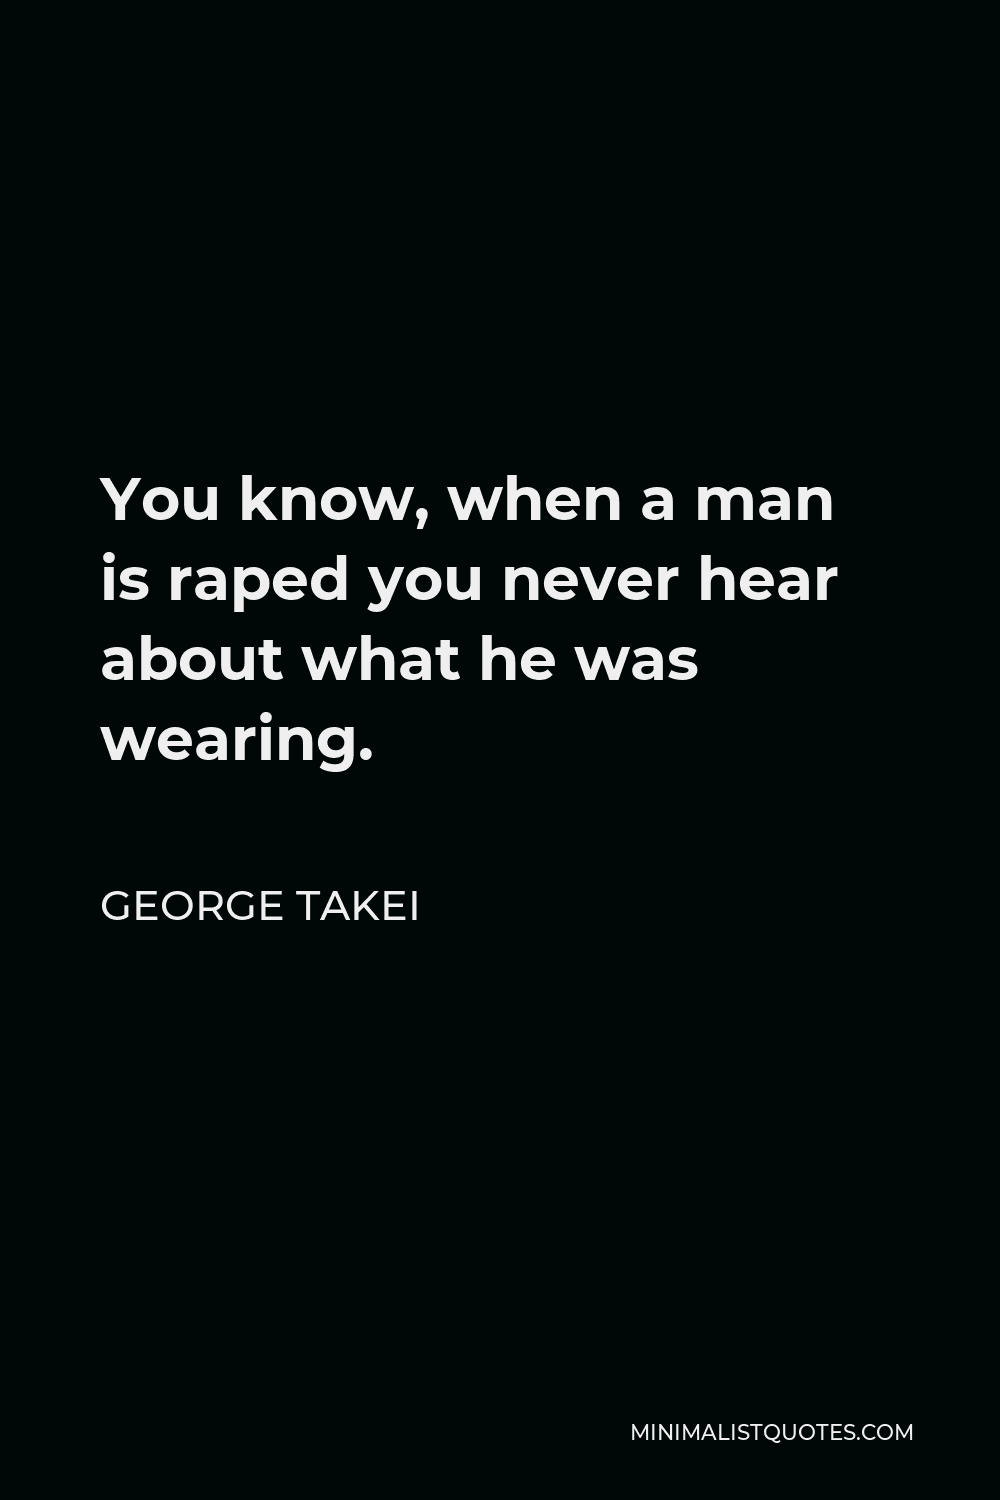 George Takei Quote - You know, when a man is raped you never hear about what he was wearing.